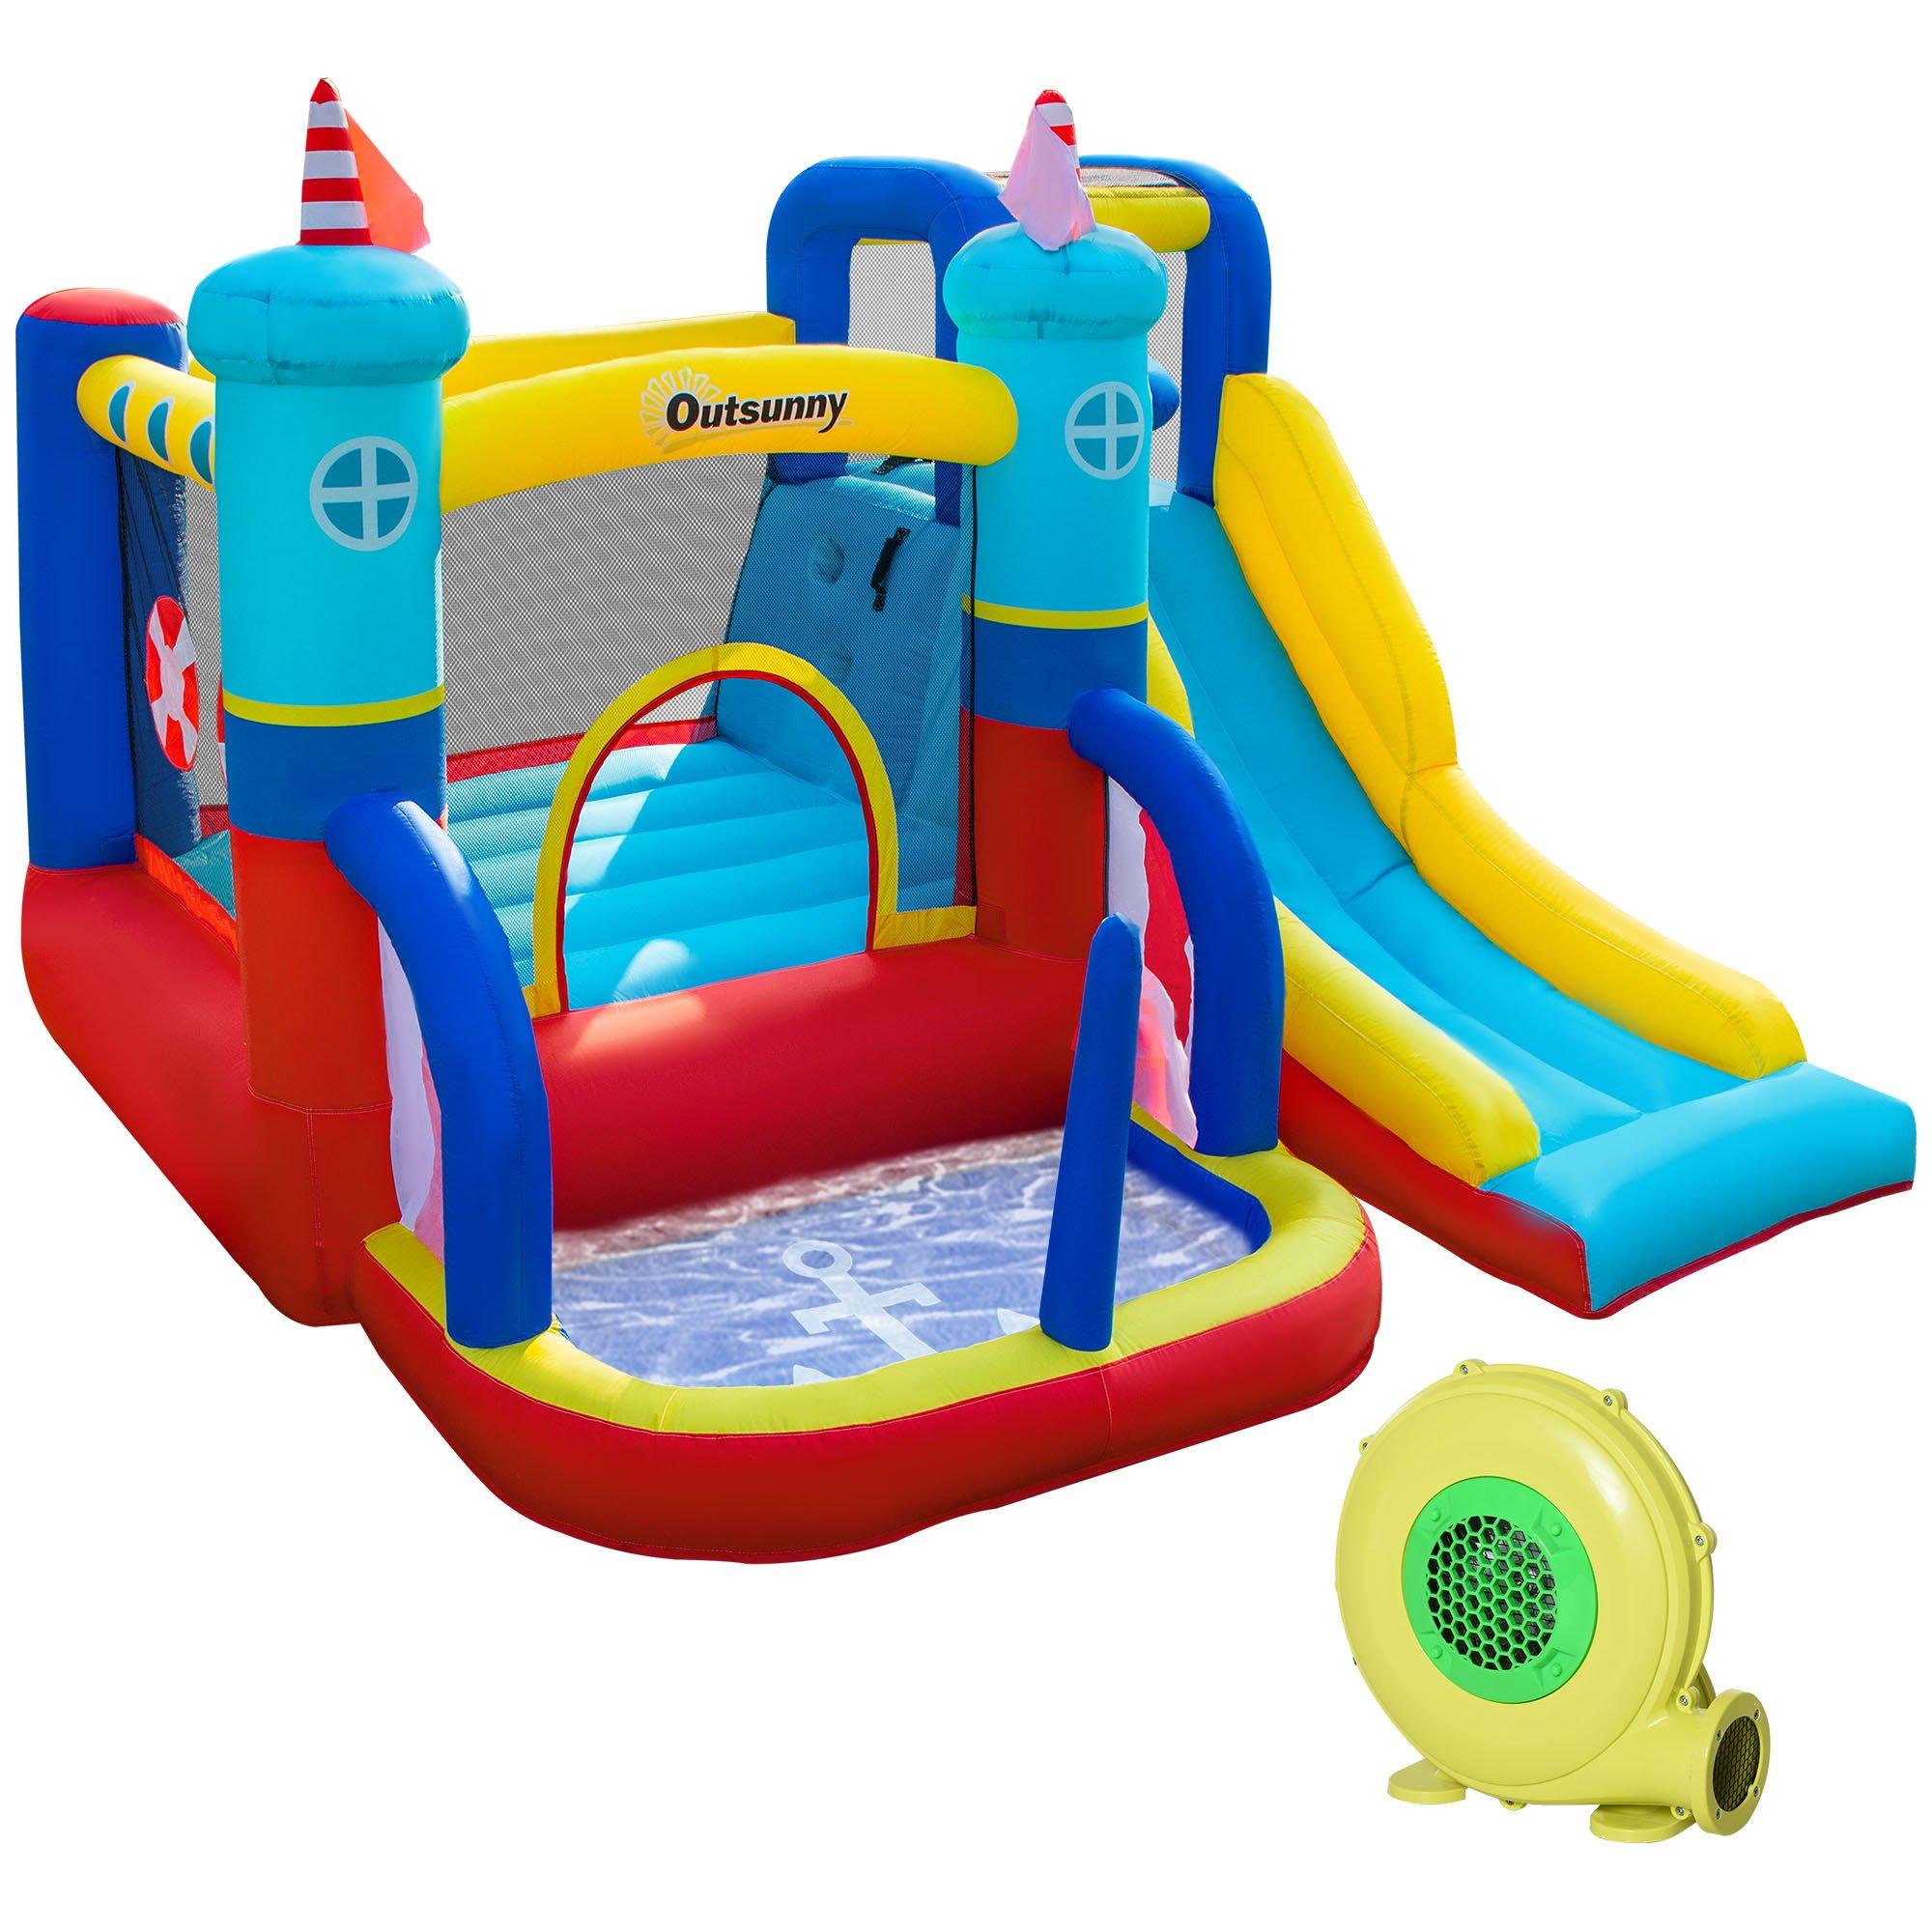 Outsunny Kids Bouncy Castle with Slide Water Pool Trampoline Climbing Wall